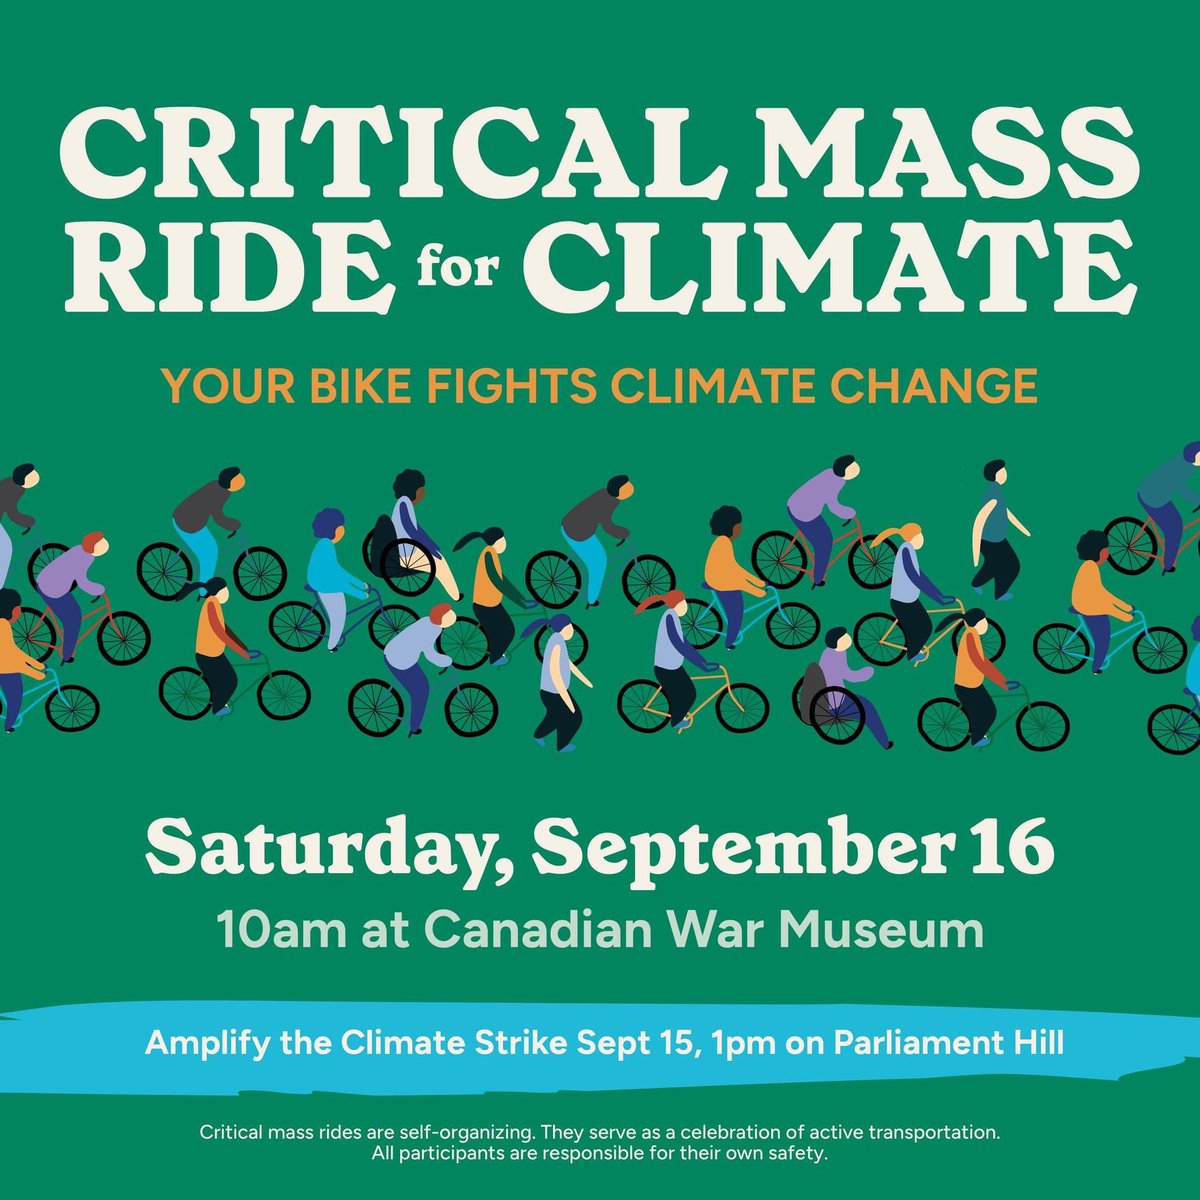 Your 🚴🏽‍♂️ fights climate change. Join hundreds of others who care about climate action at this @FFF_Ottawa Climate Strike echo ride. #ottbike #ottawacriticalmass #ClimateActionNow